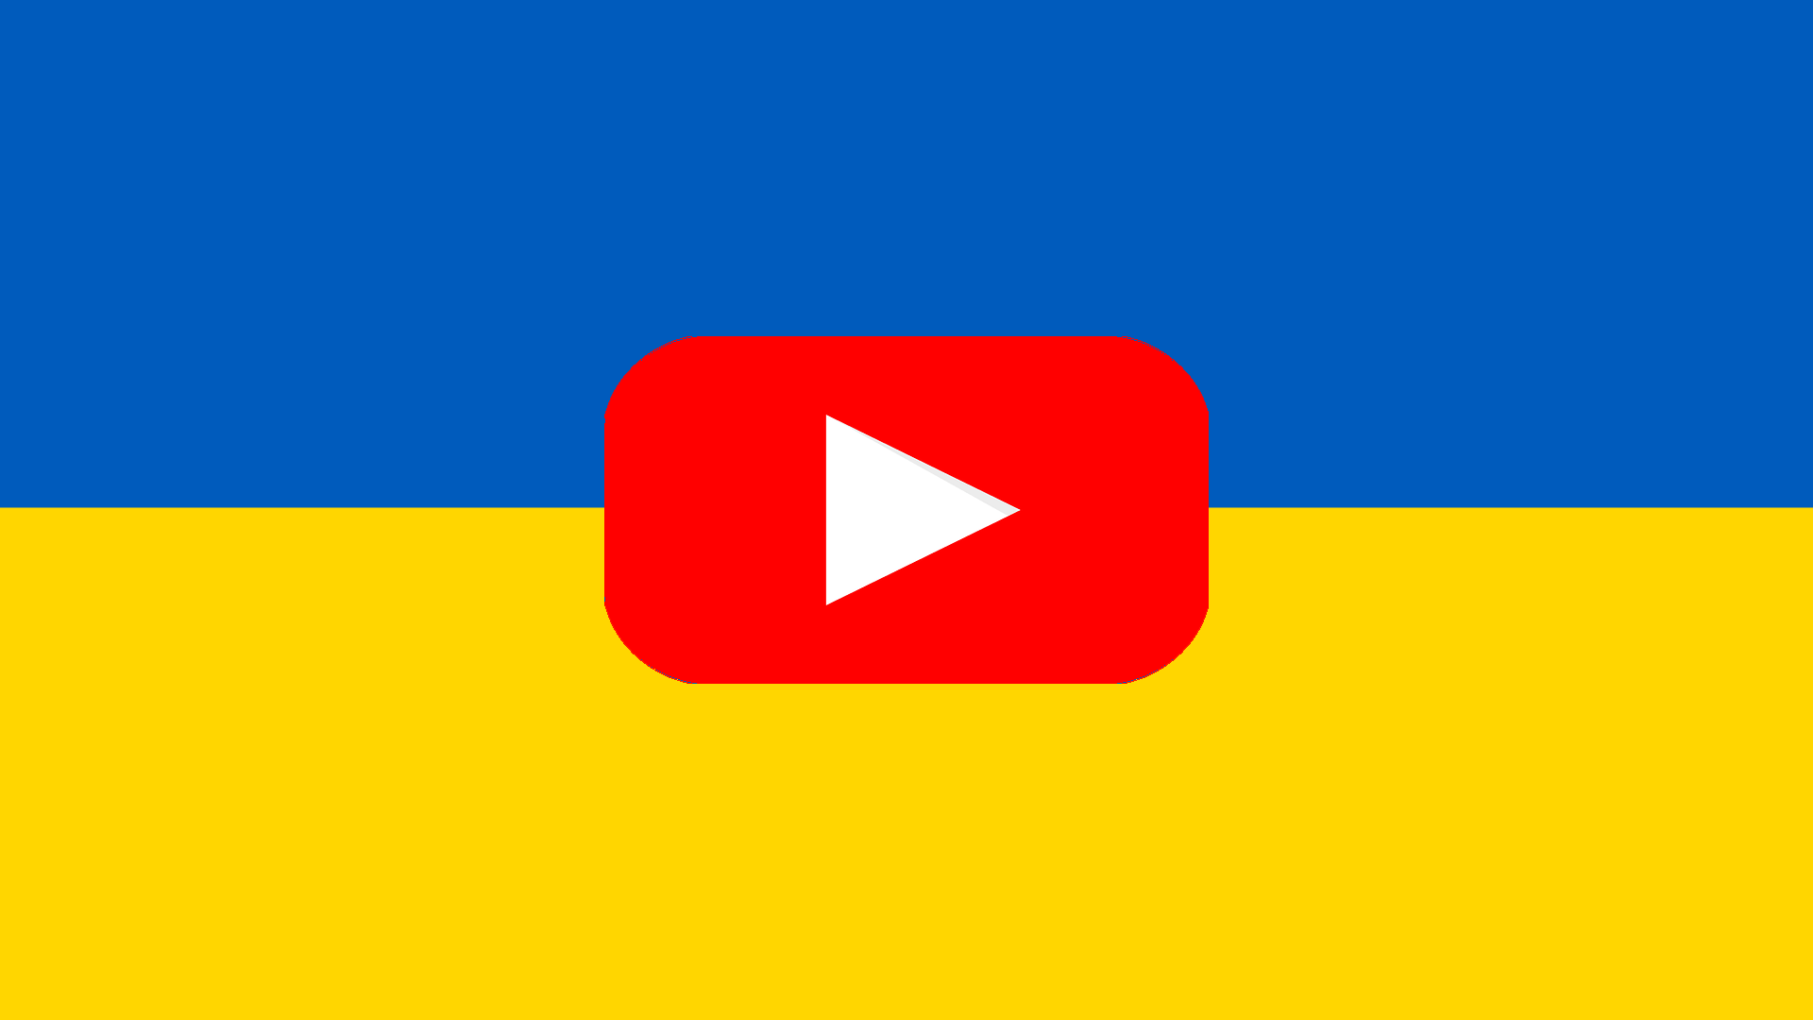 Link to videos about the war in Ukraine by Jake Broe.